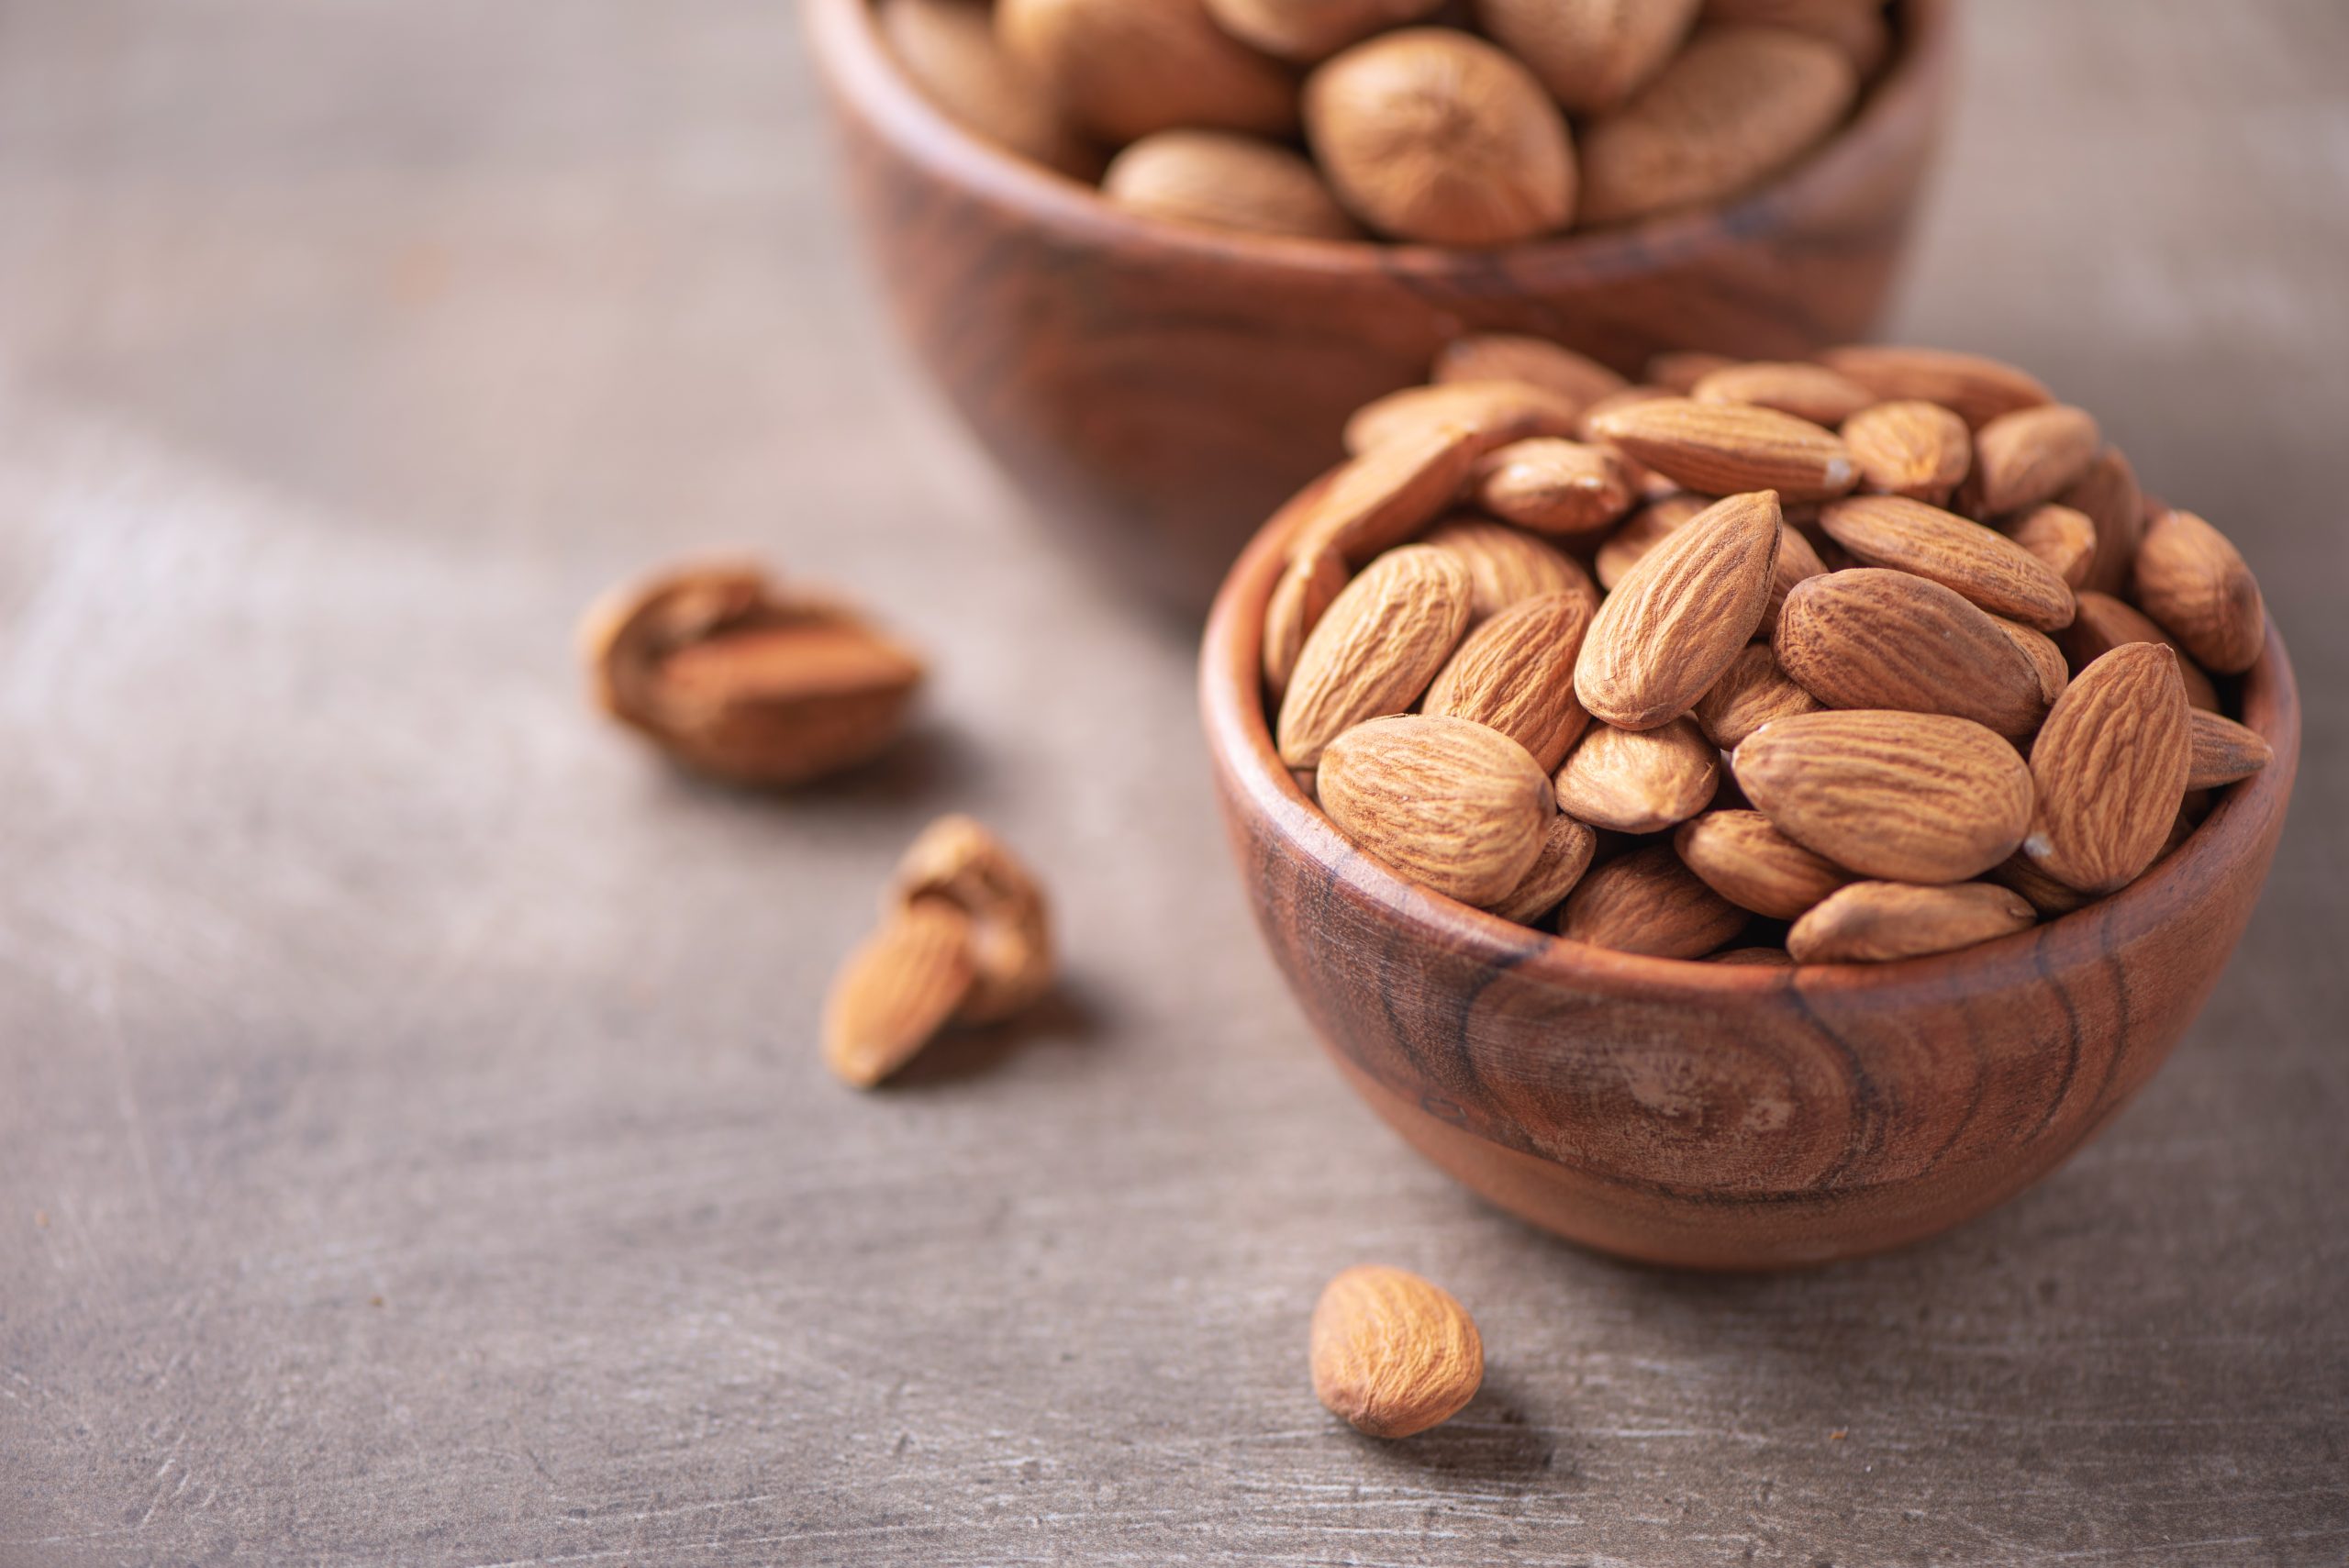 Almond nuts in wooden bowl on wood textured background. Copy space. Superfood, vegan, vegetarian food concept. Macro of almond nut texture, selective focus. Healthy snack